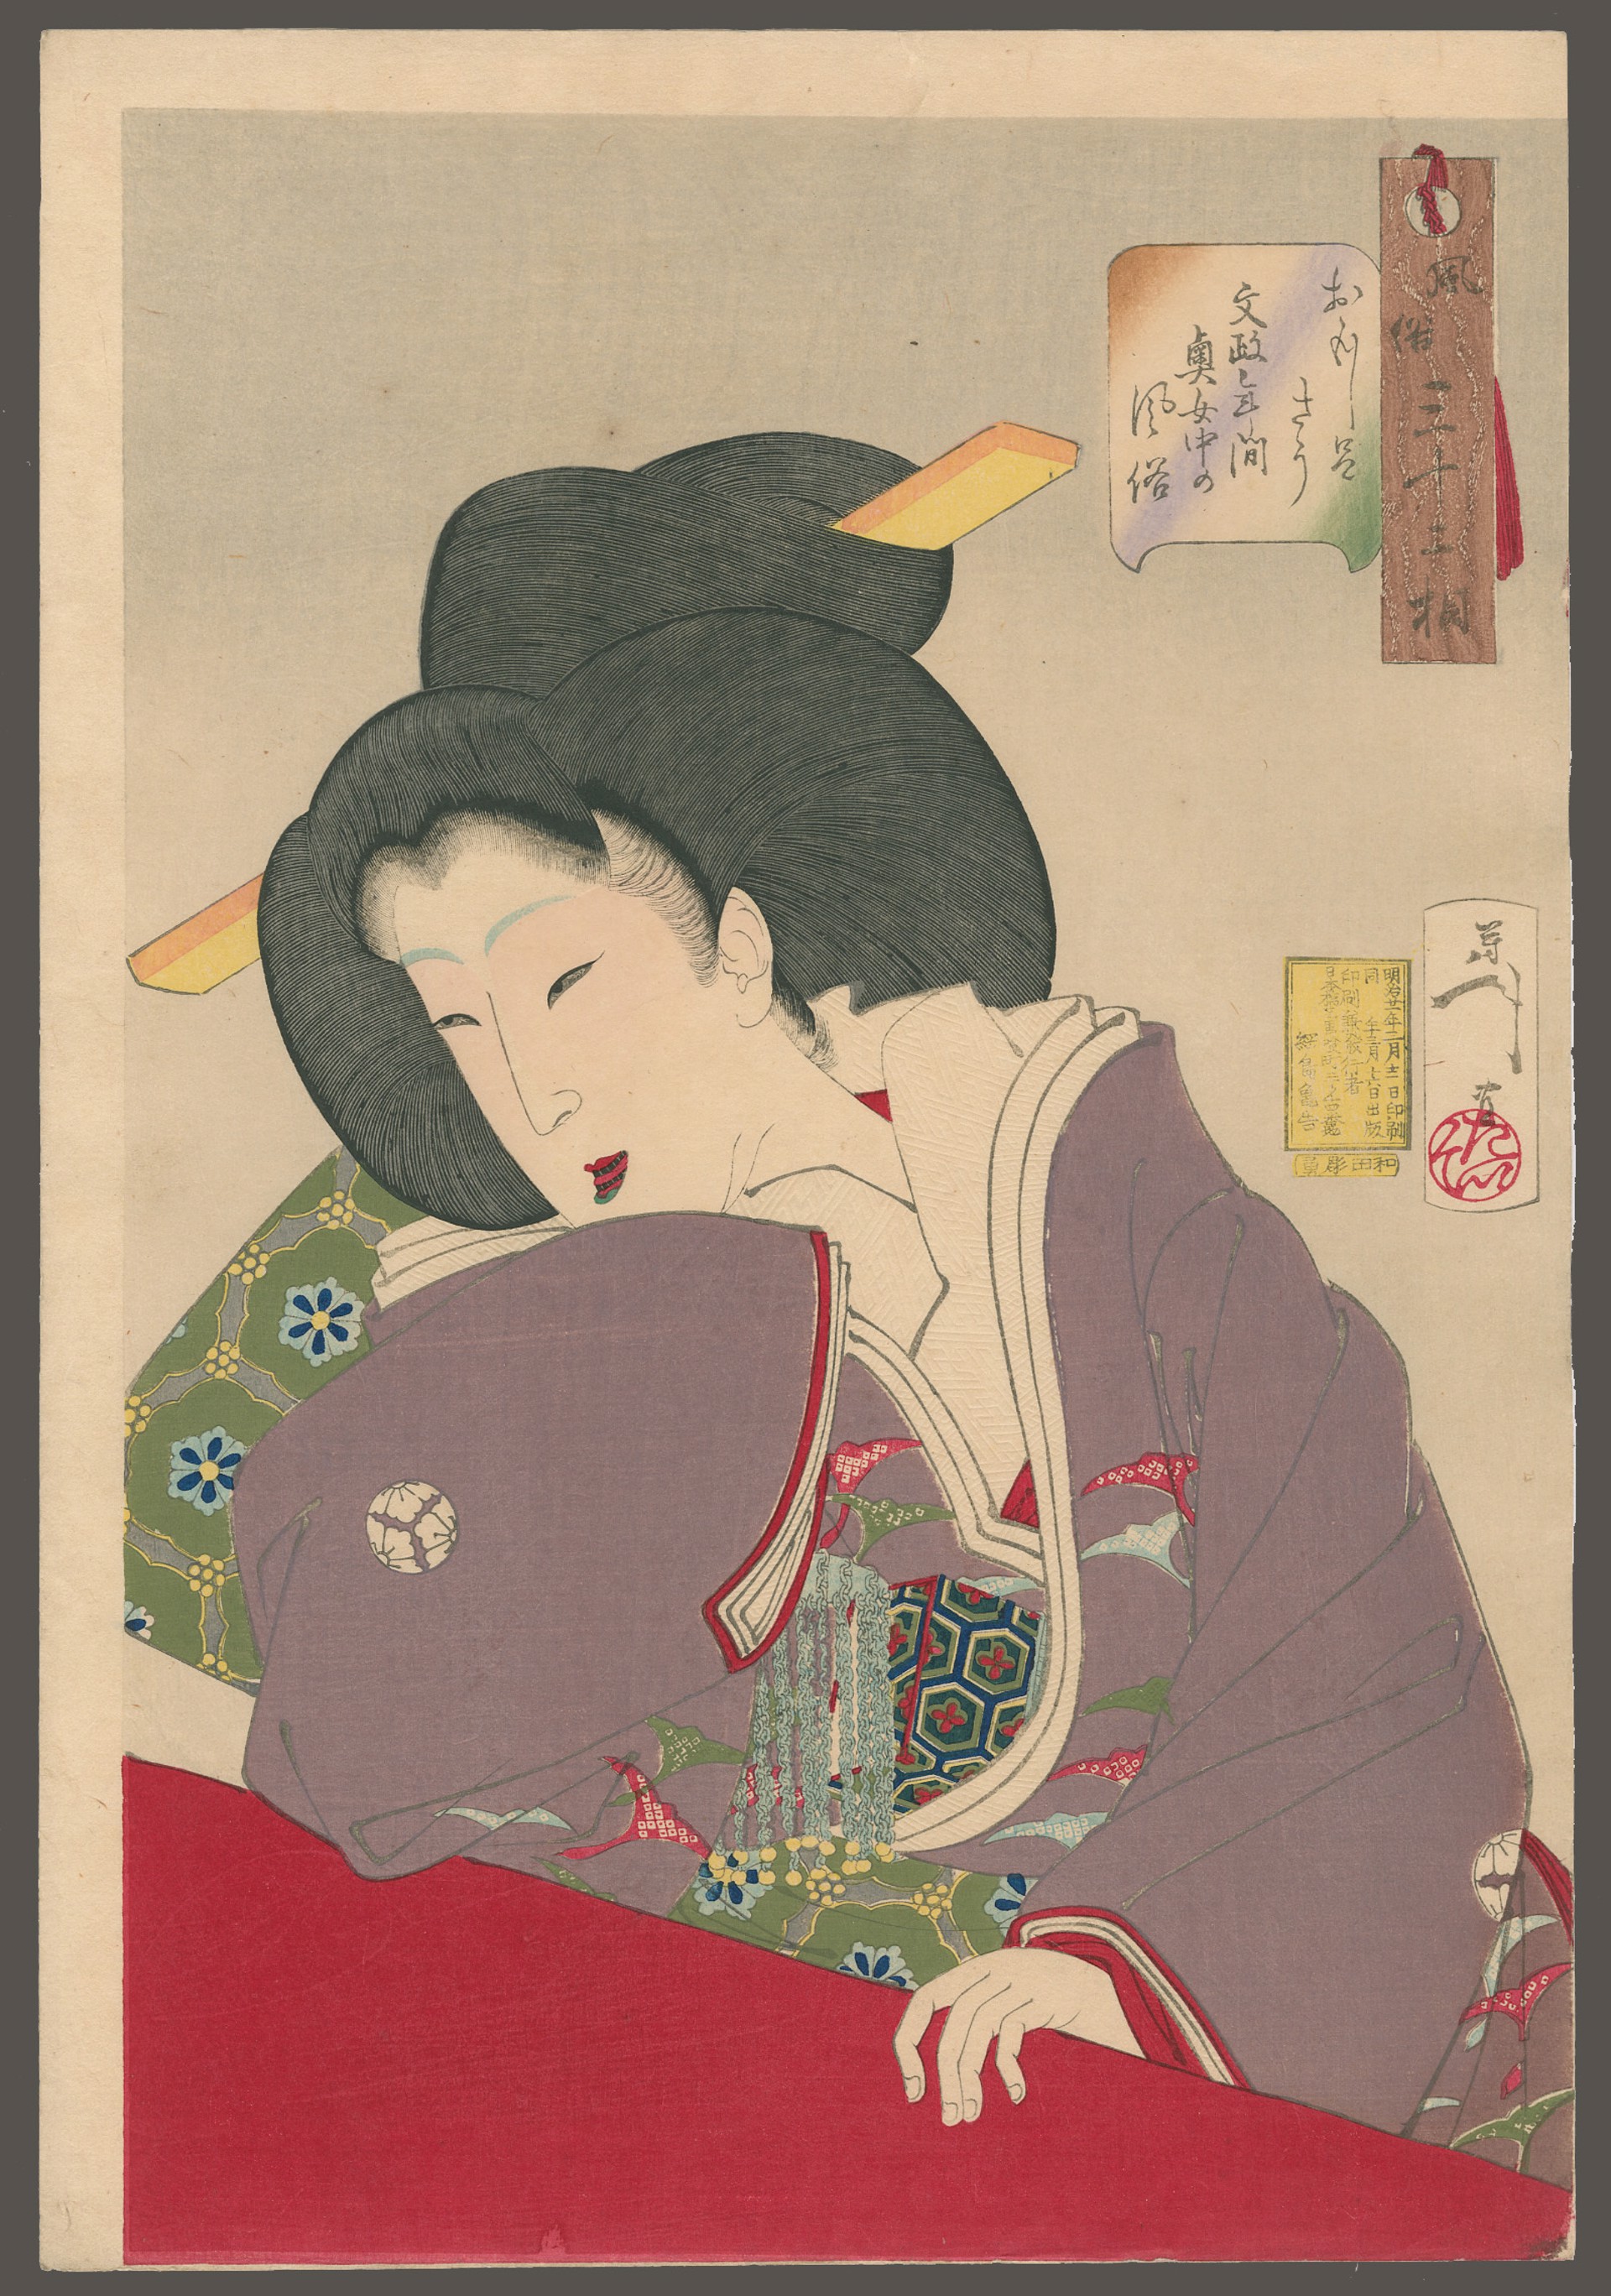 Looking Amused: Habits of a "Lady-inWaiting" of the Busei Era 32 Aspects of Women by Yoshitoshi